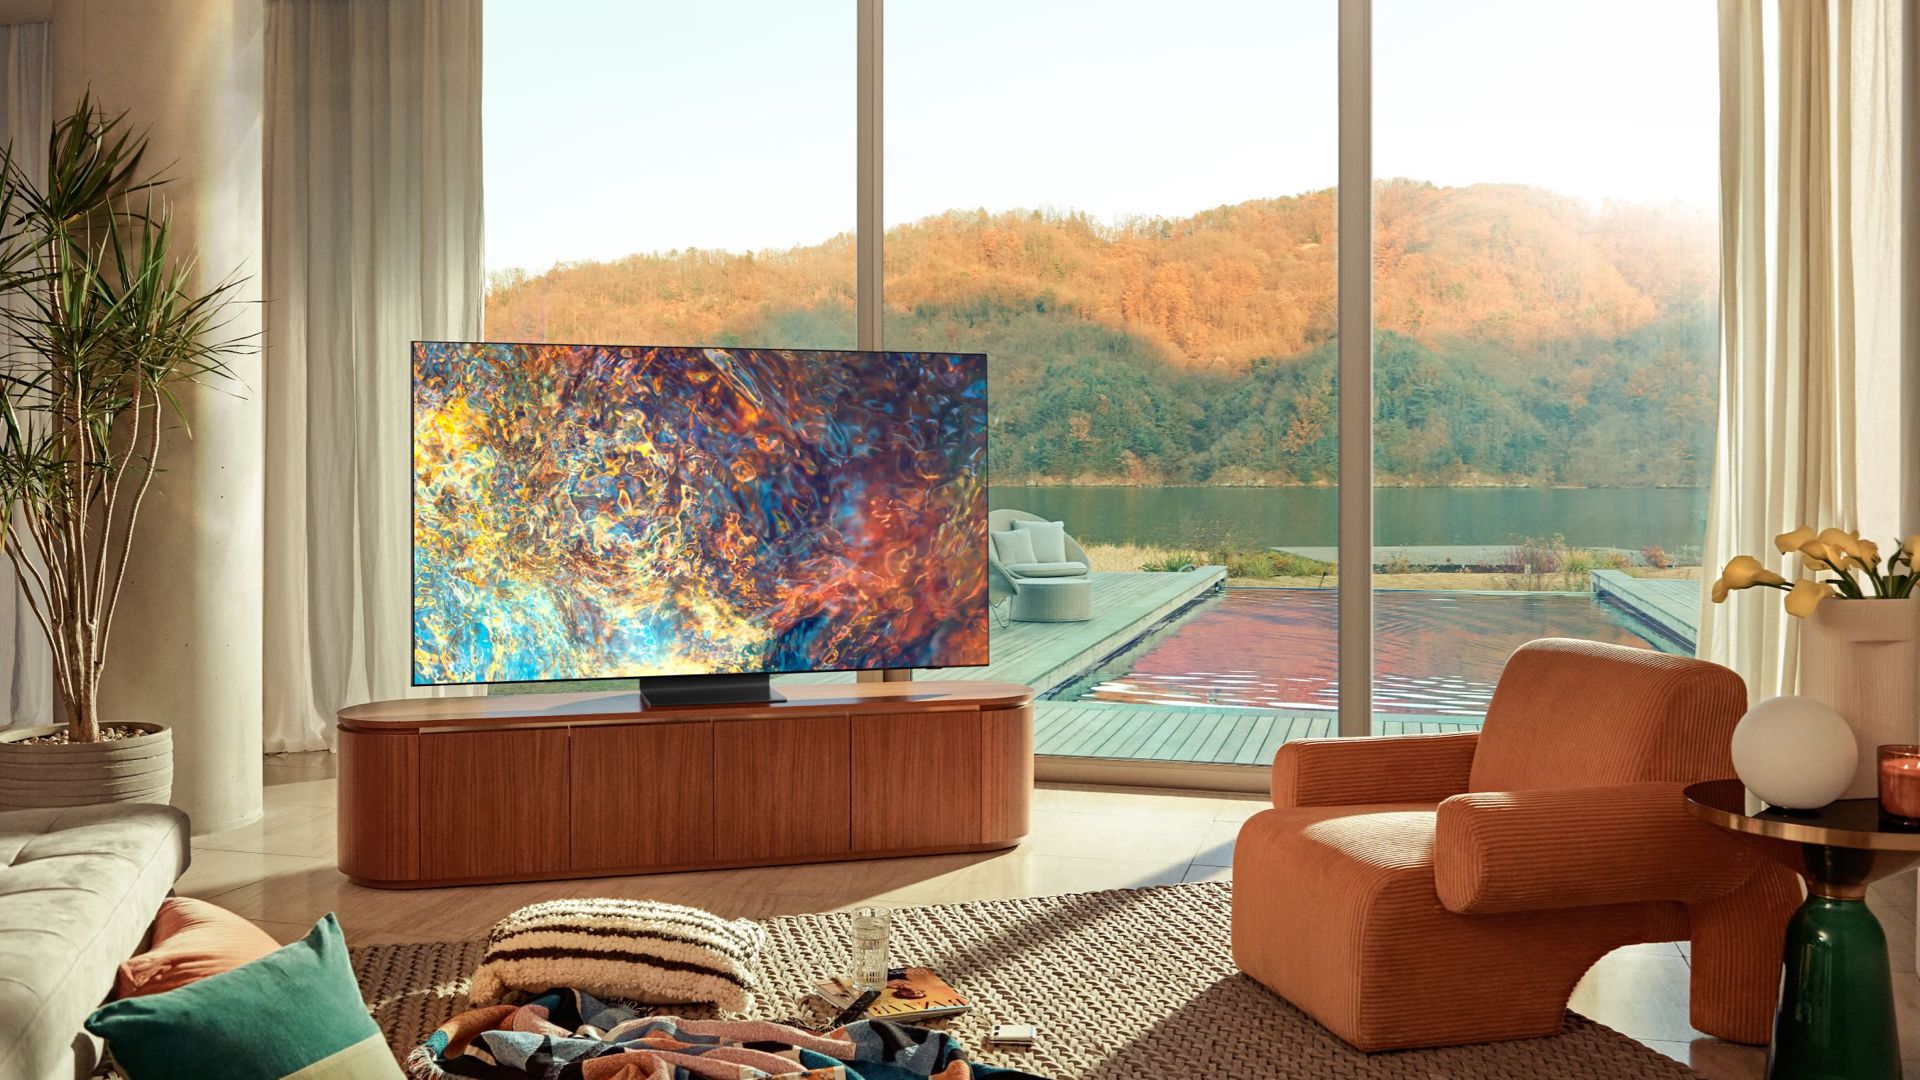 Samsung’s Neo QLED 4K QN85C Series Quantum HDR Smart TV now comes with up to 34 percent savings